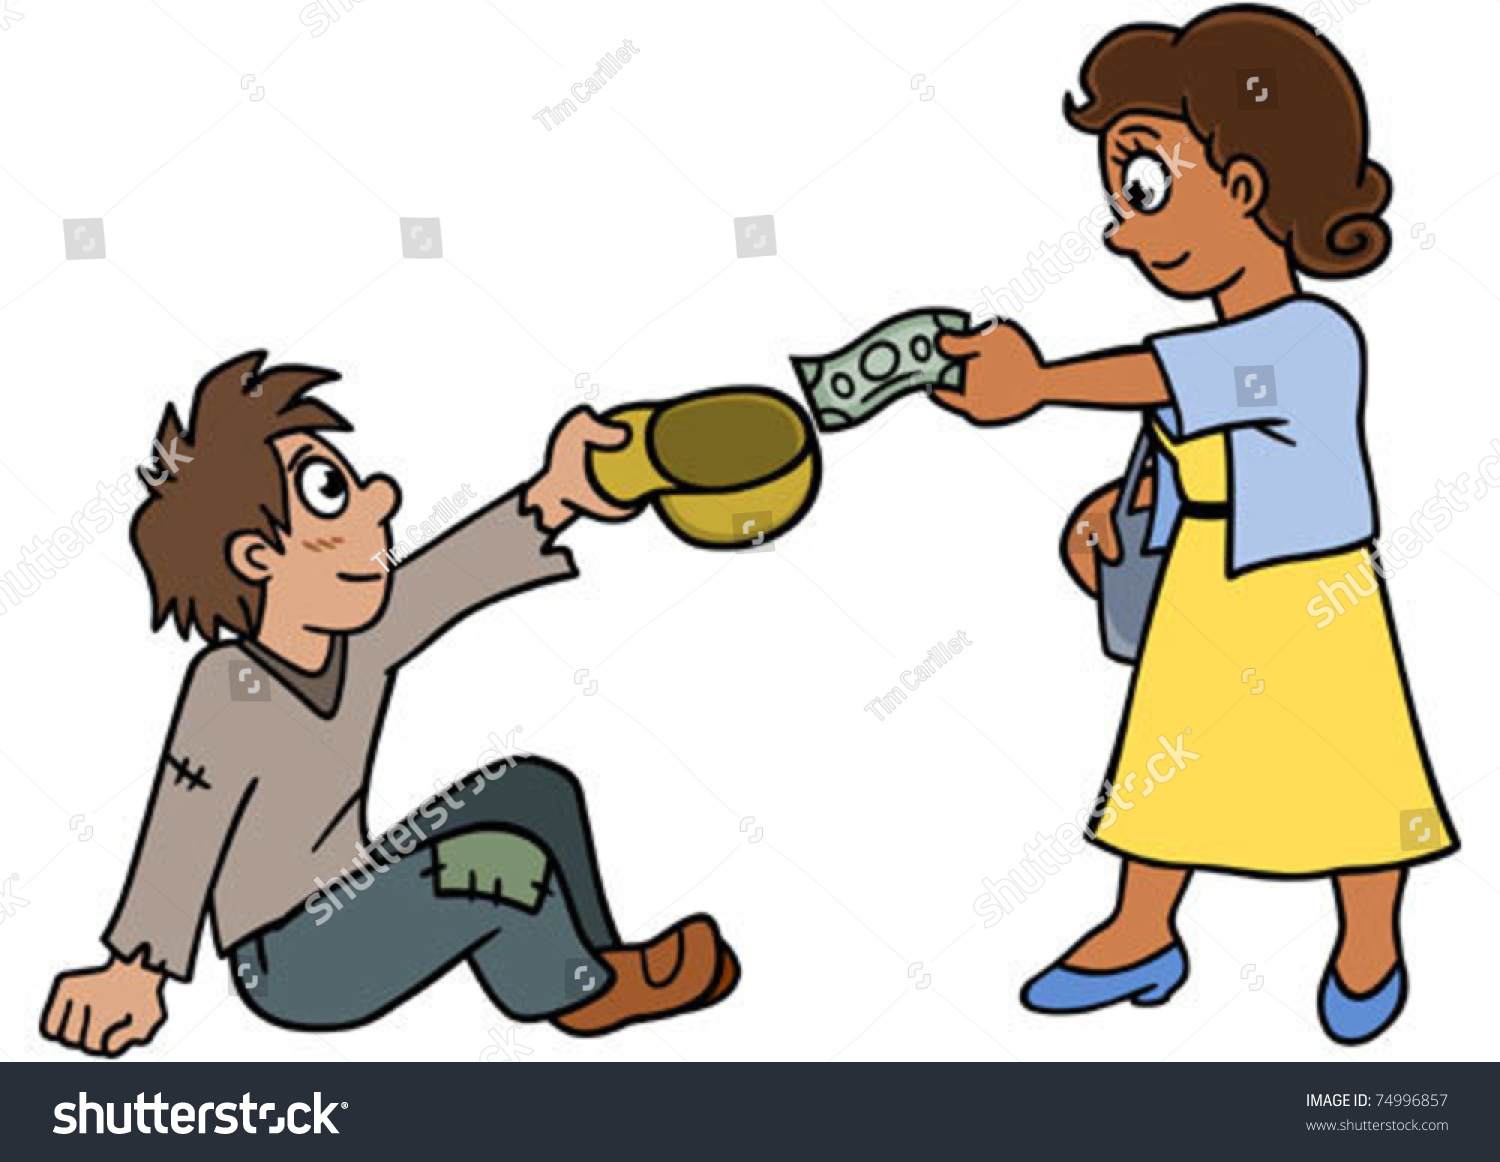 SVG of A woman donating to someone in need. svg